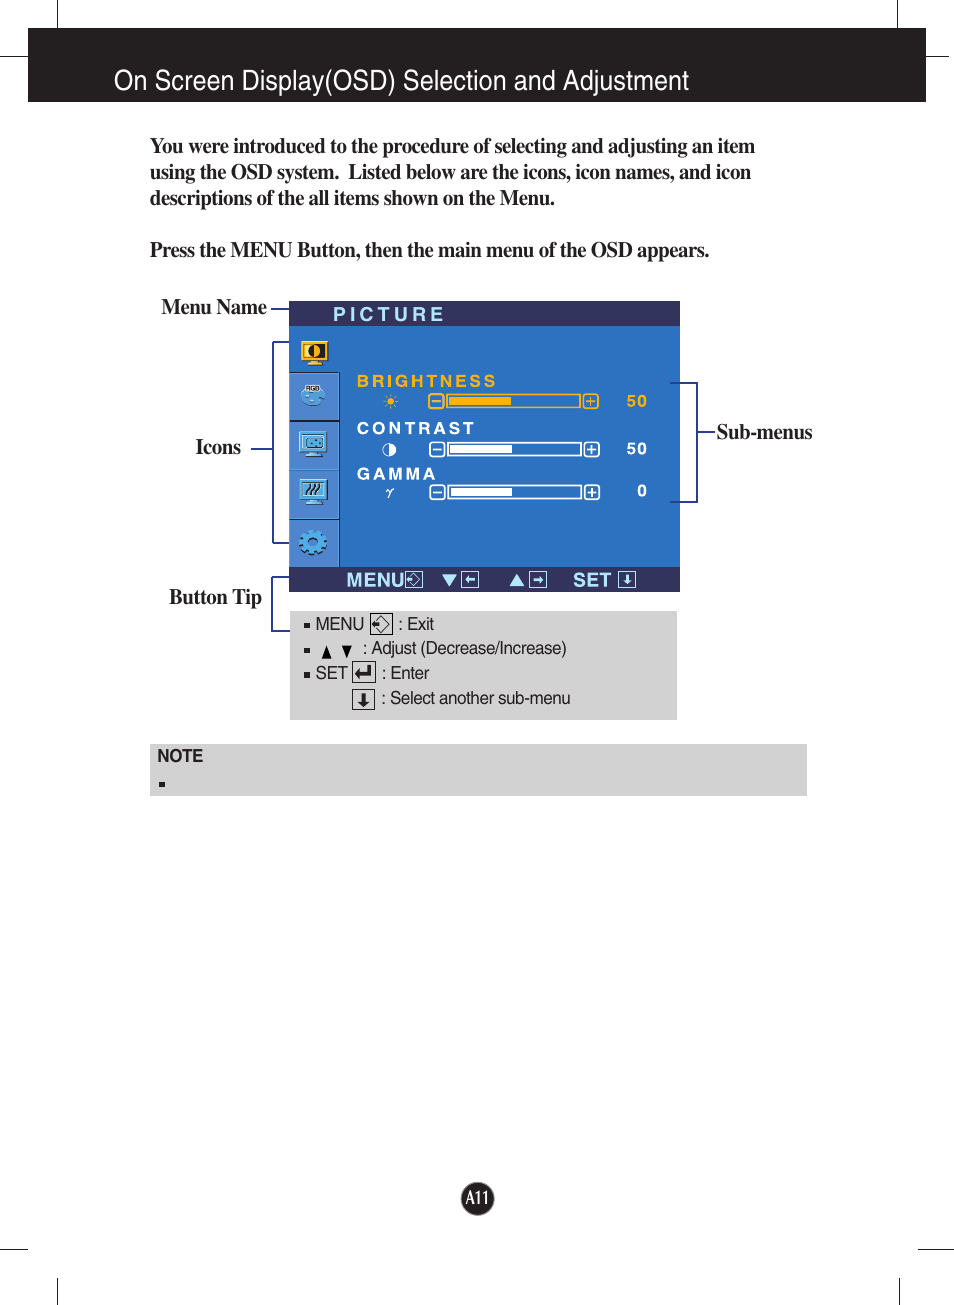 On screen display(osd) selection and adjustment | LG W2234S-BN User Manual | Page 12 / 24